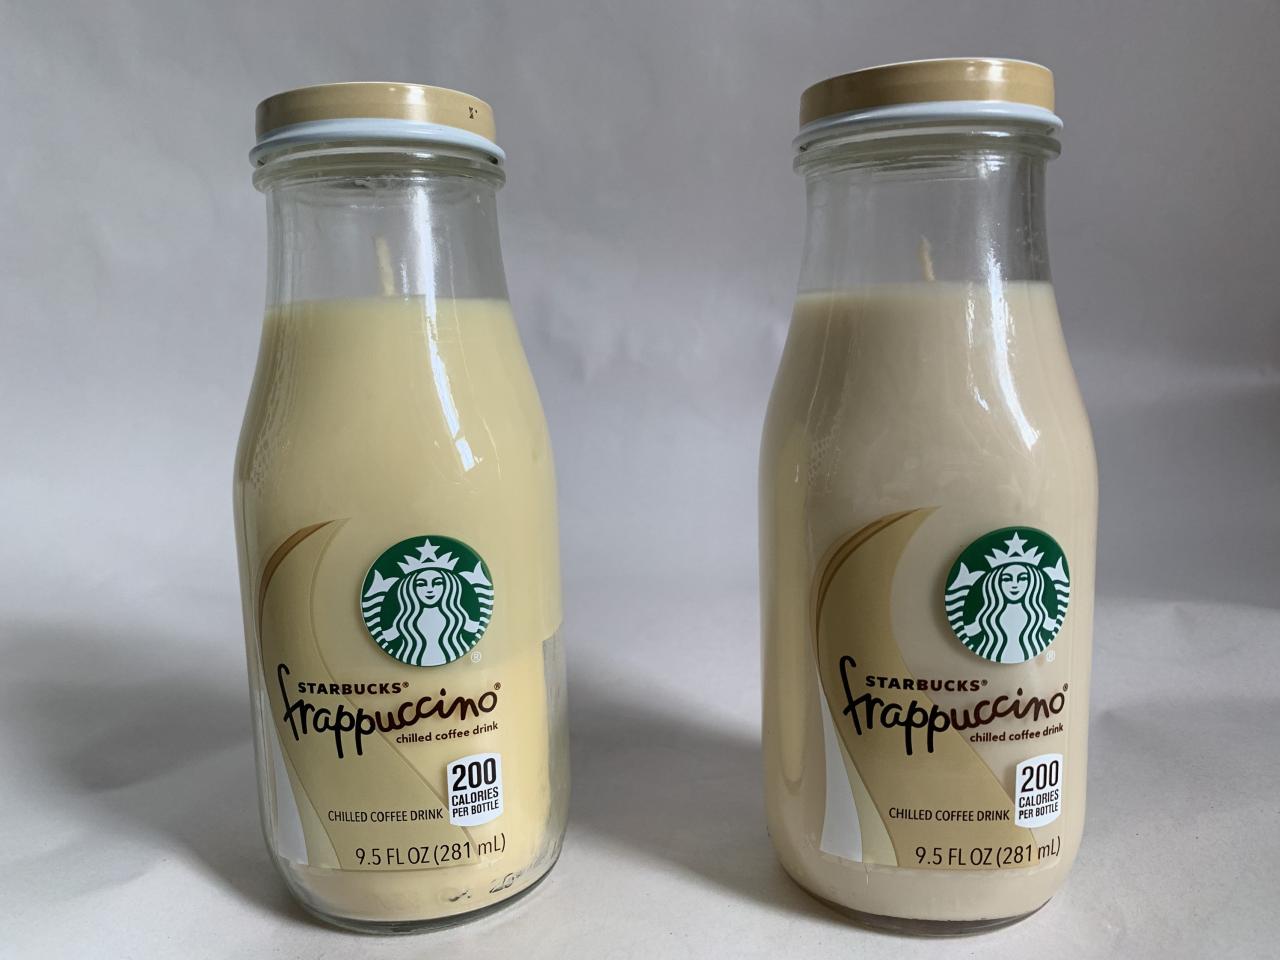 Starbucks Frappuccino Coffee Candle |soy candles |candles with wicks |starbs |coffee candles |party favors |wedding favors |candle votive